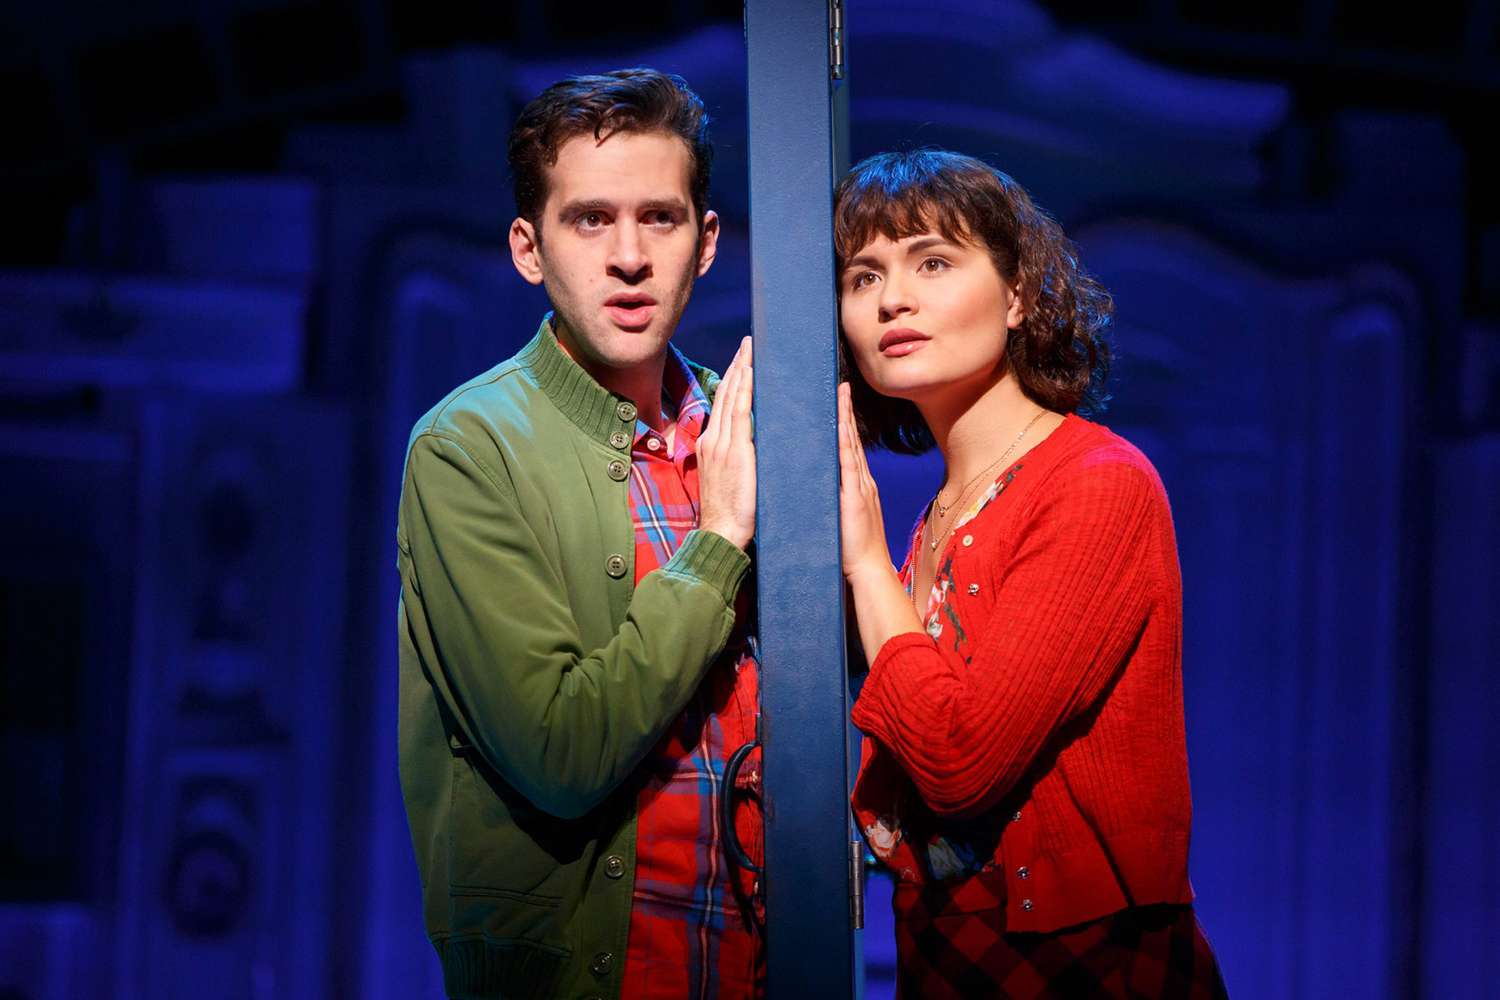 Amelie:  A New Musical